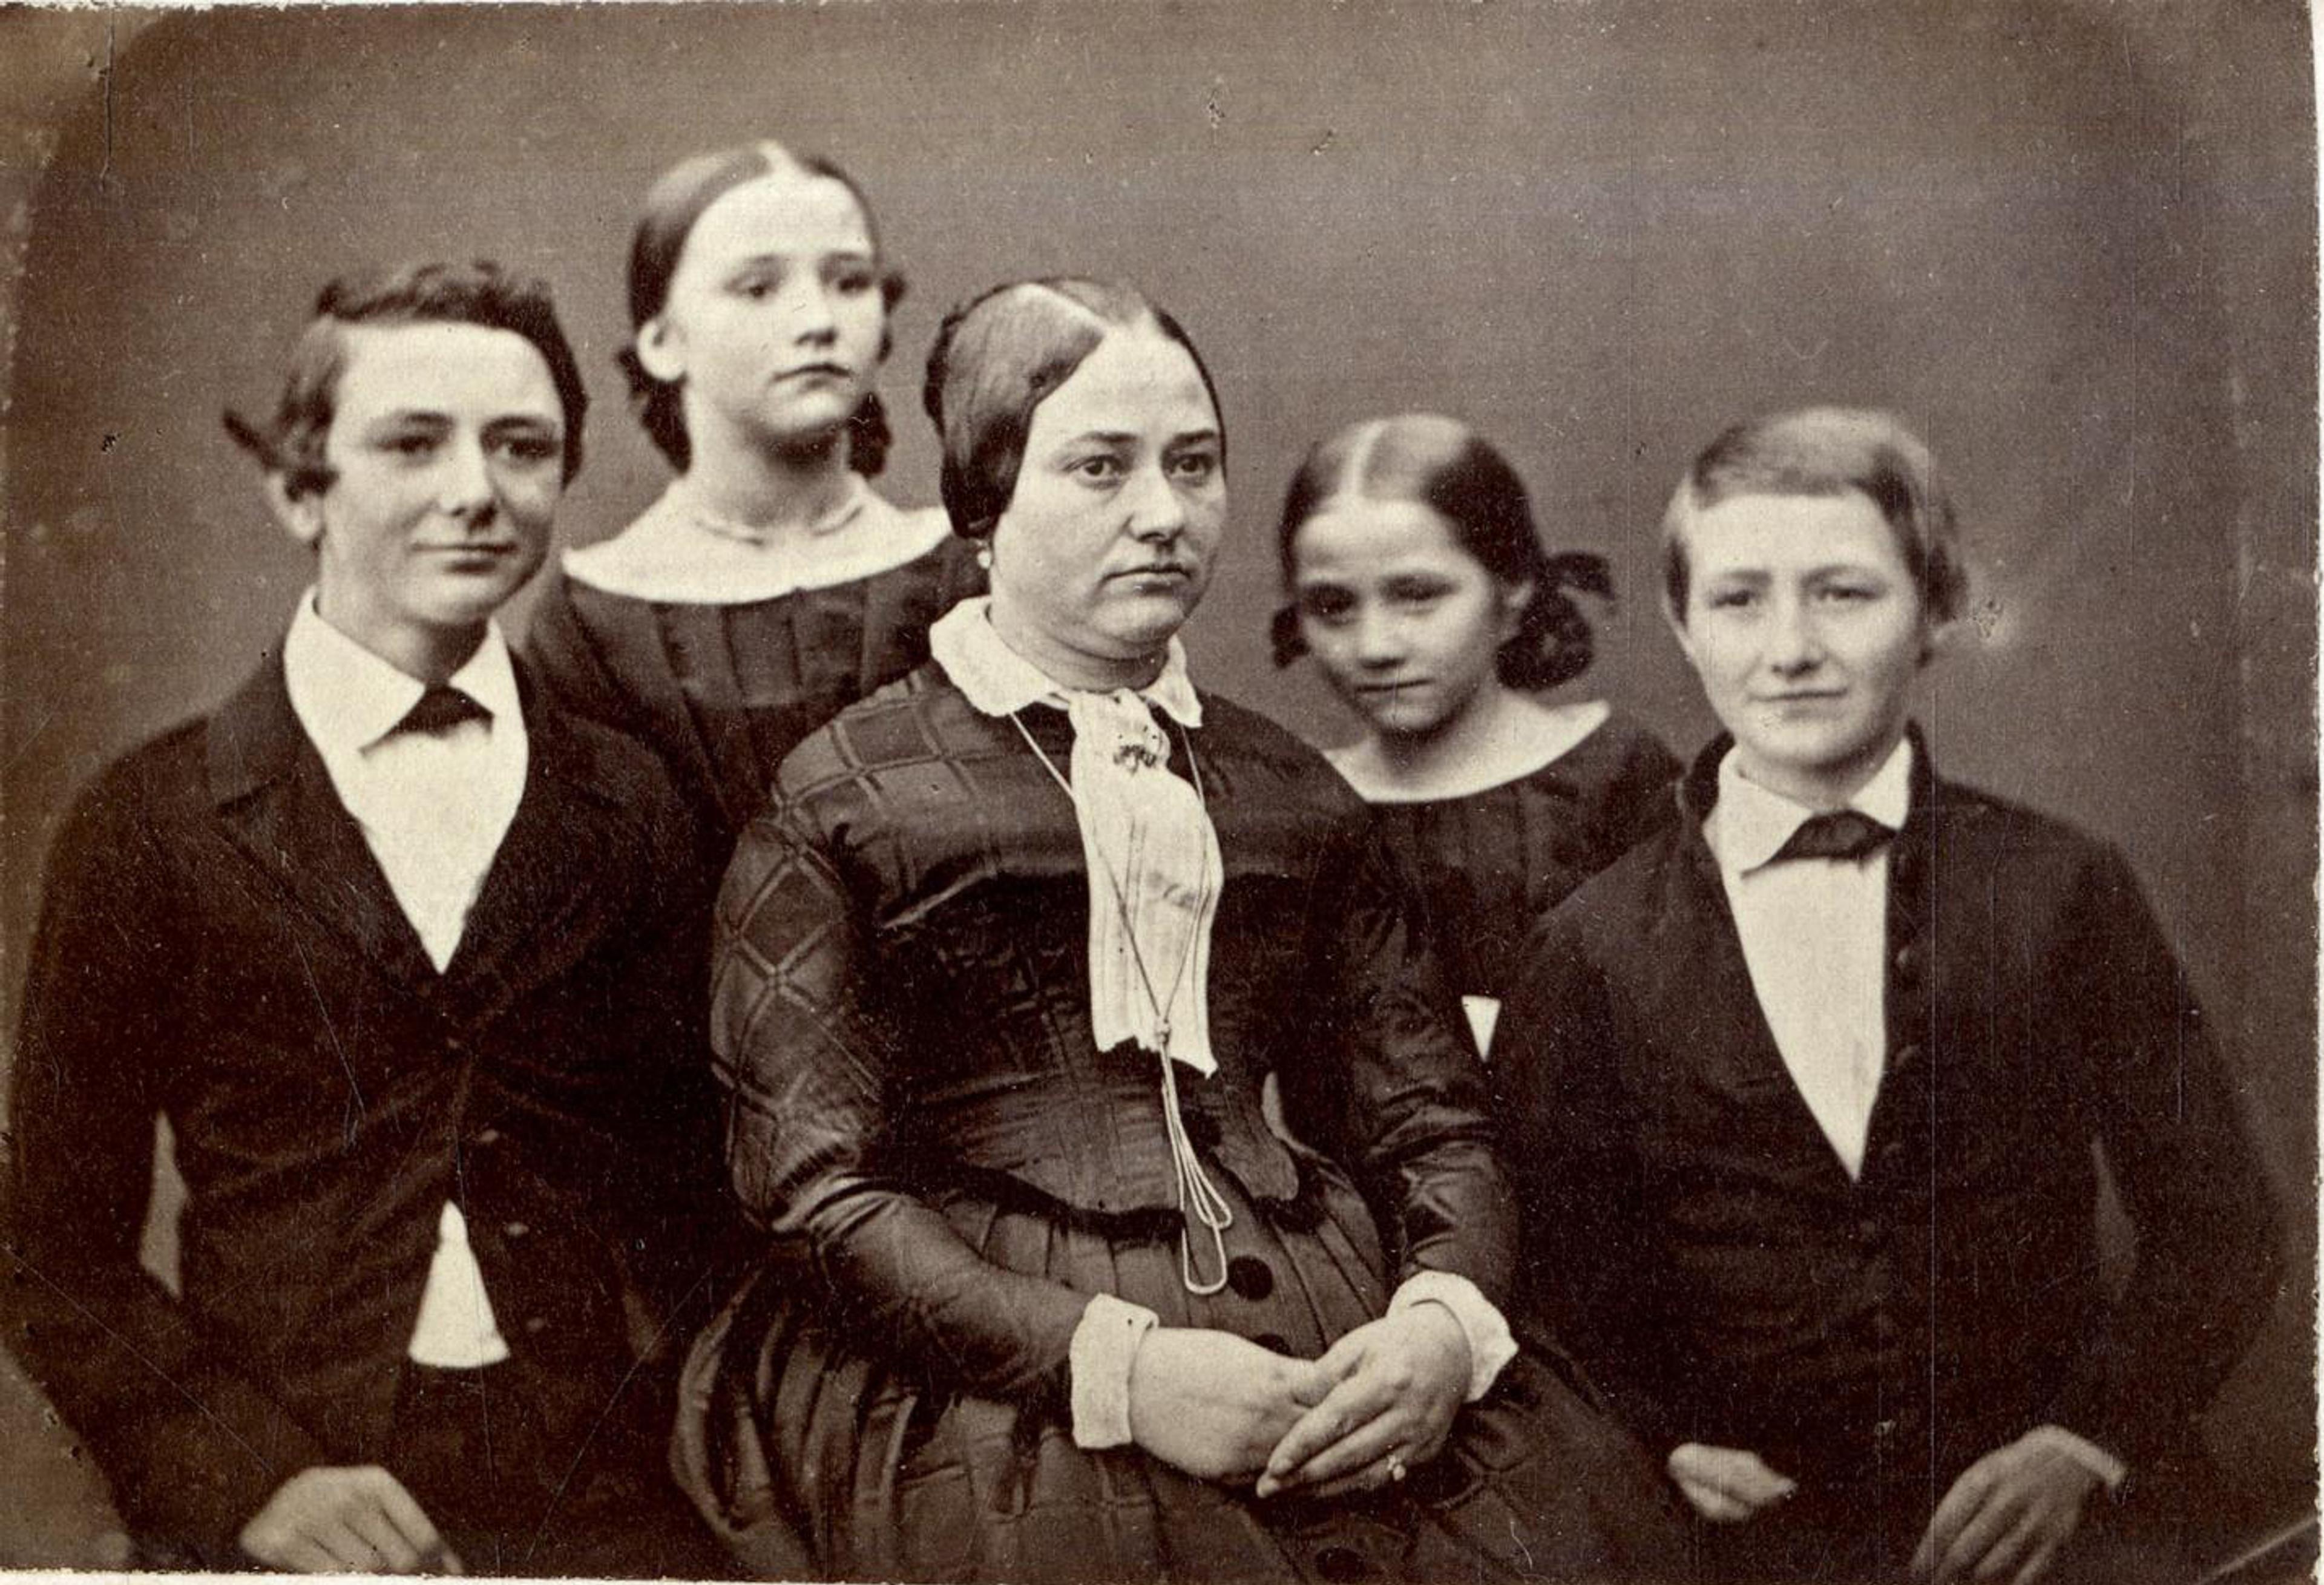 Photograph of Ole Bulls family depicting his first wife Felicite together with their four children in the age between 4 and 15